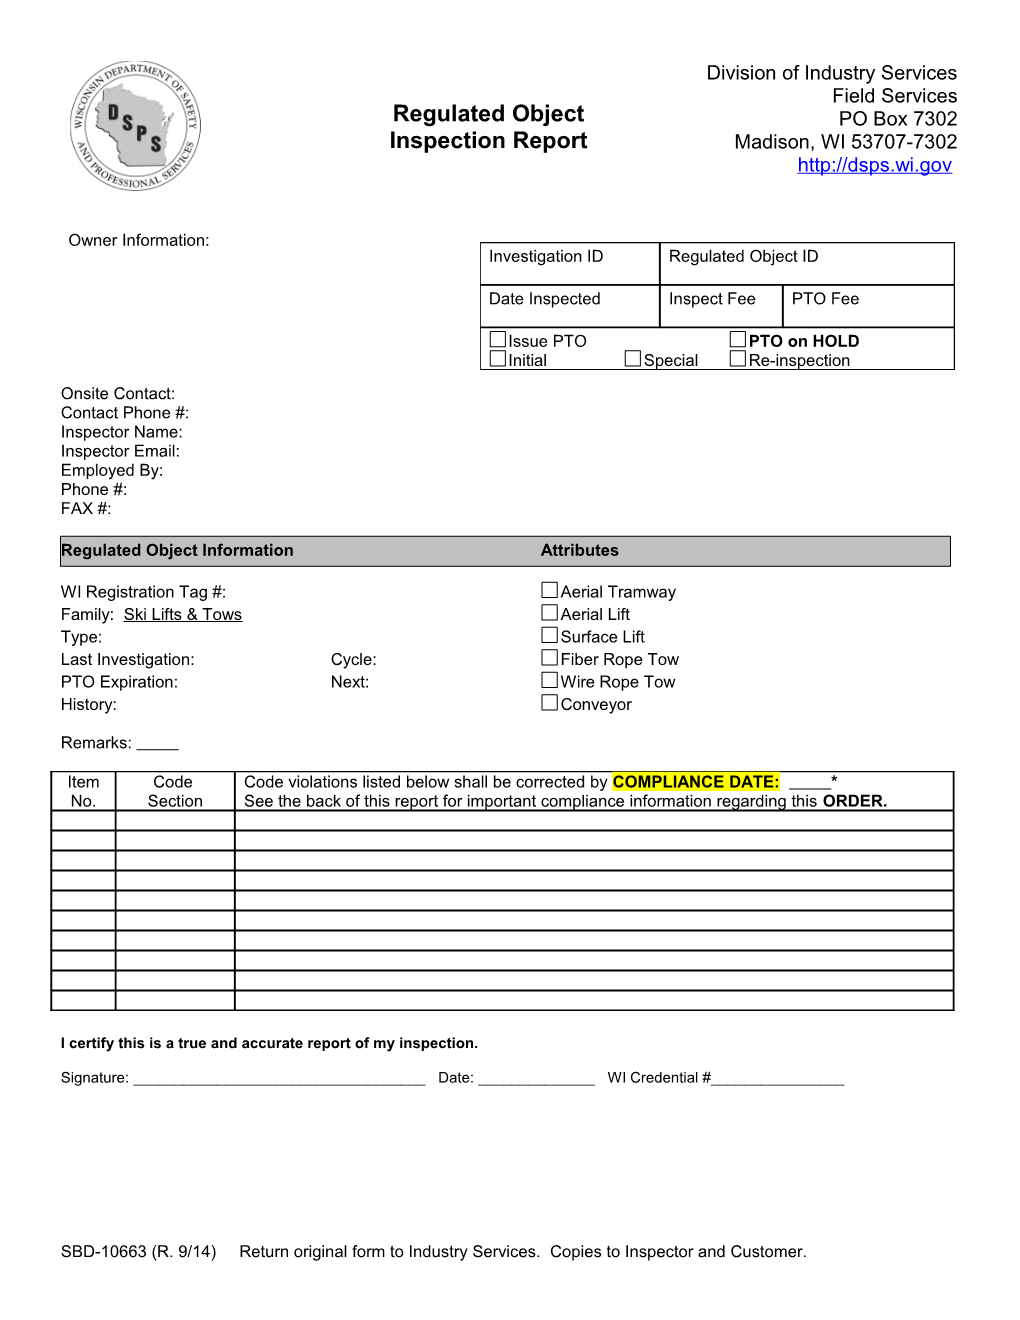 SBD-10663 (R. 9/14) Return Original Form to Industry Services. Copies to Inspector and Customer